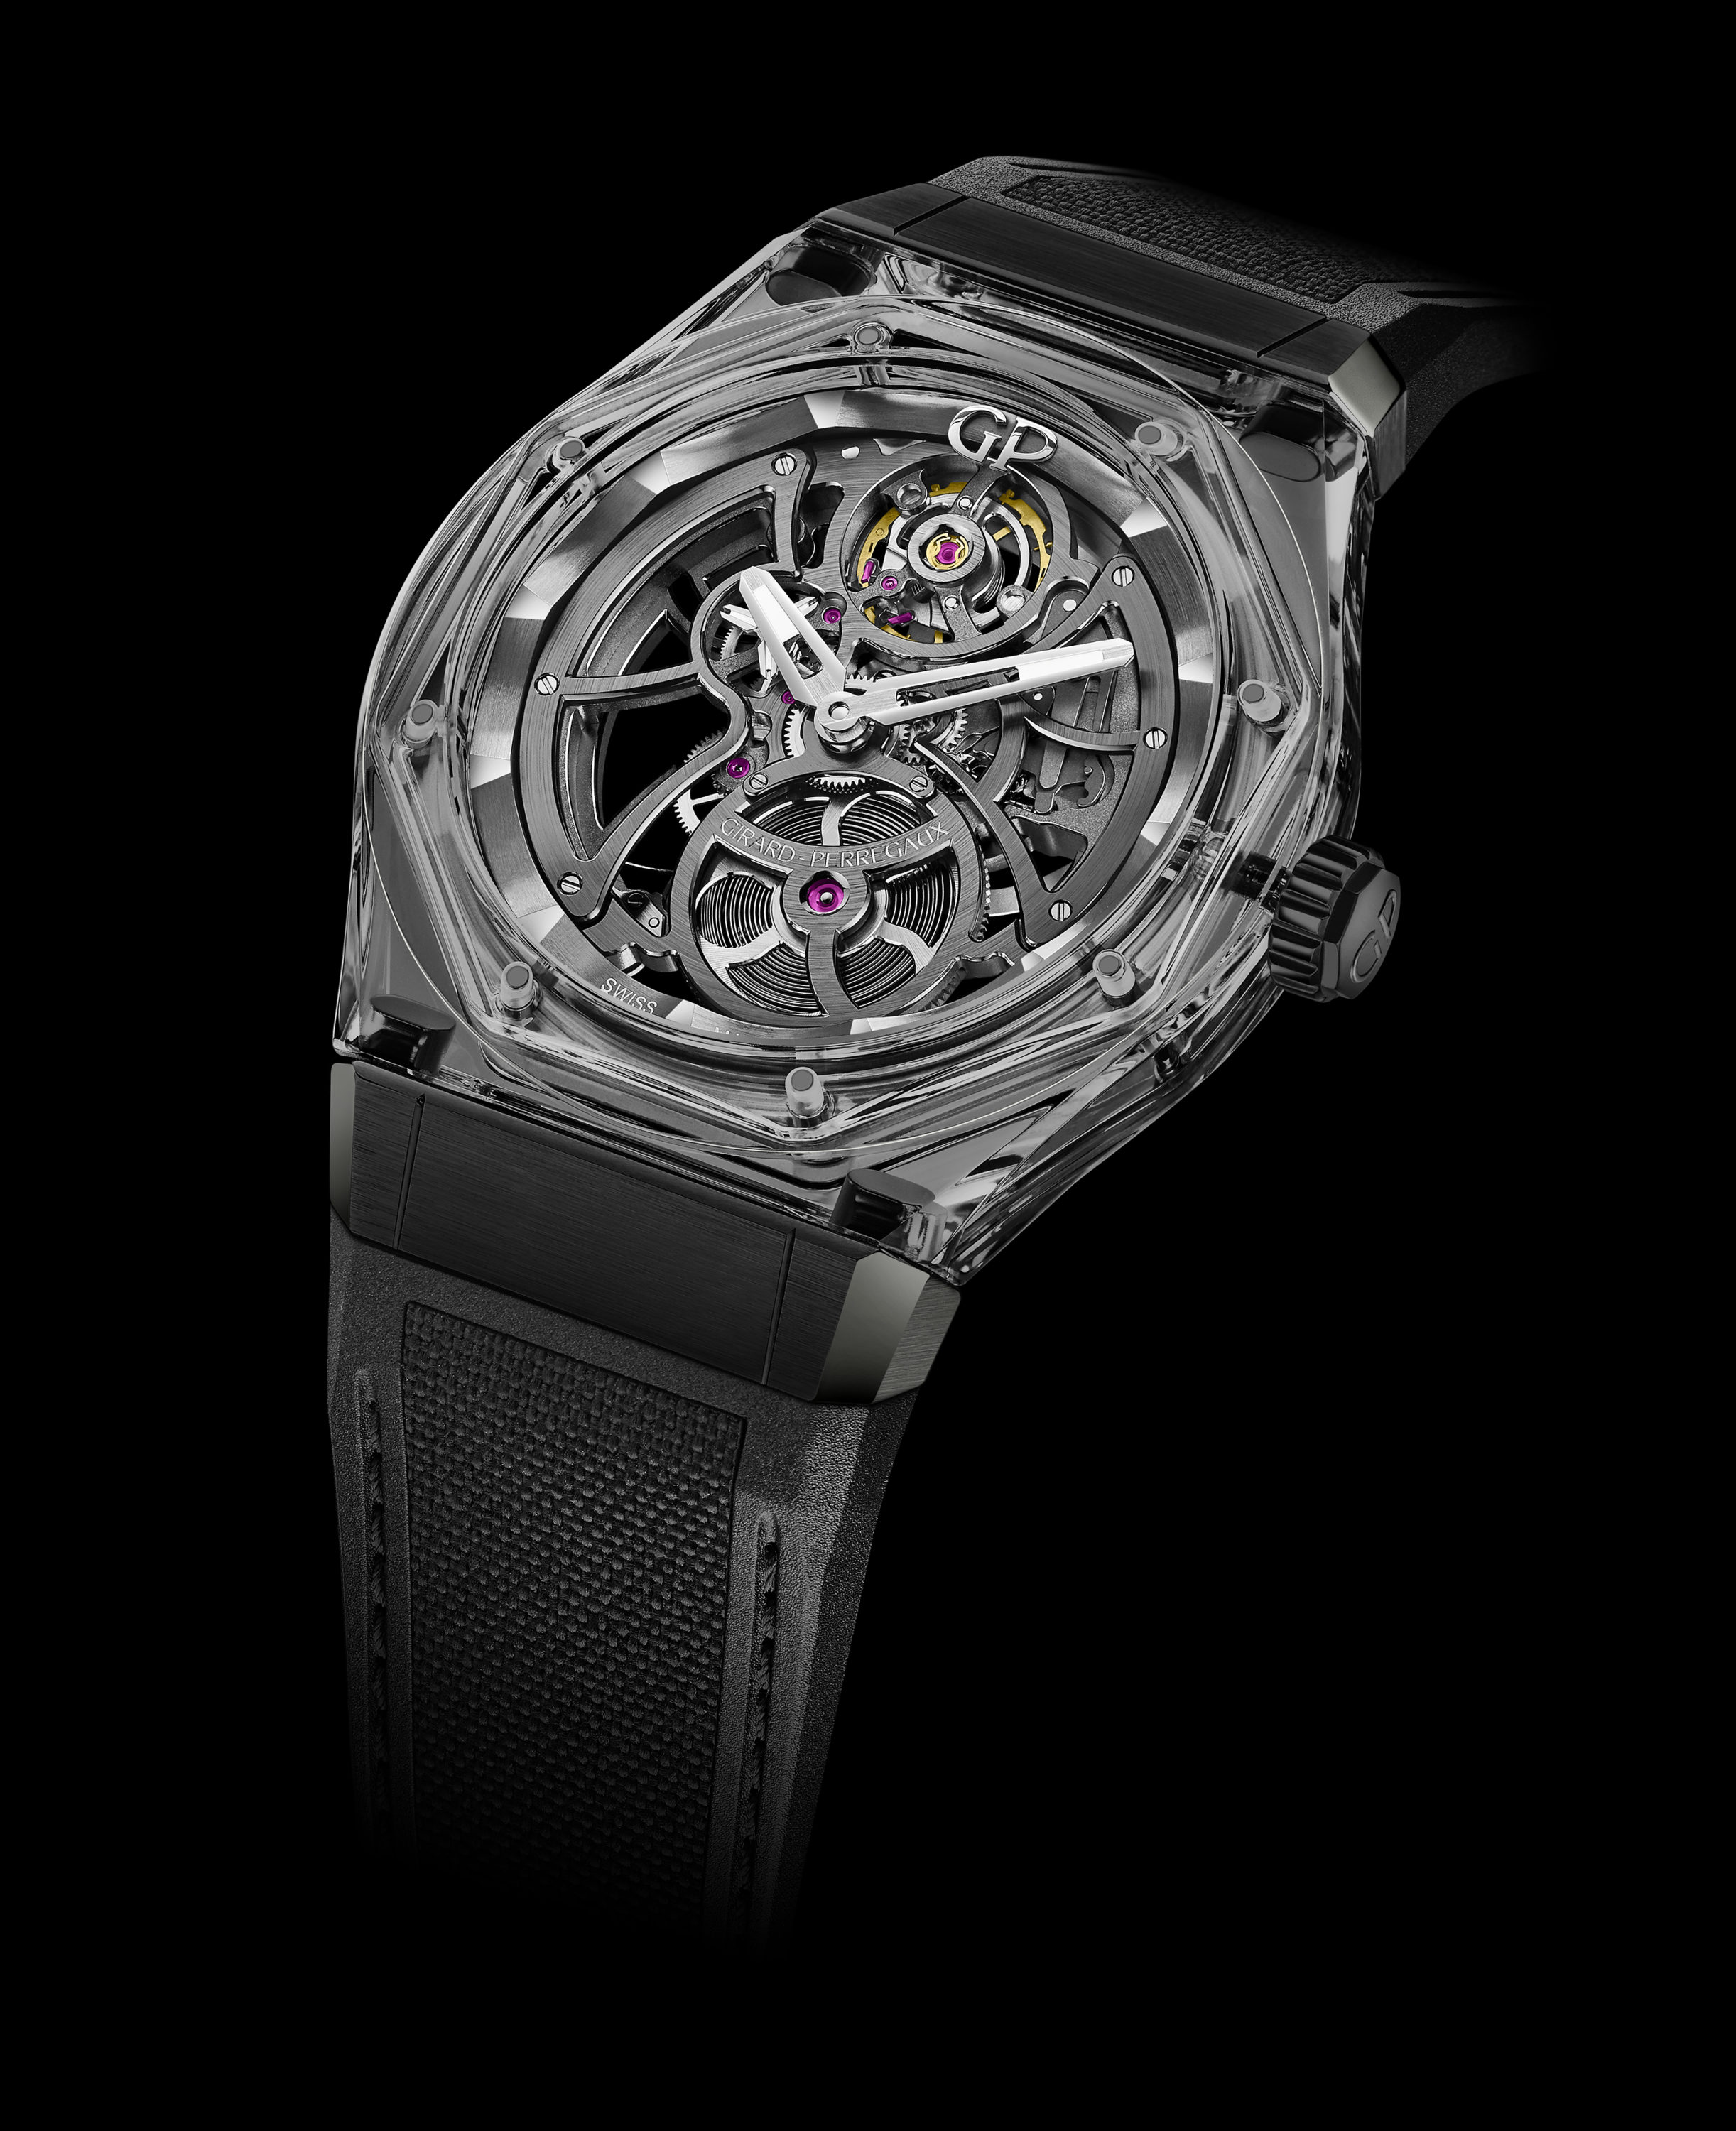 Let There Be Light: Girard-Perregaux Launches Two Intriguing Laureato Absolute Models